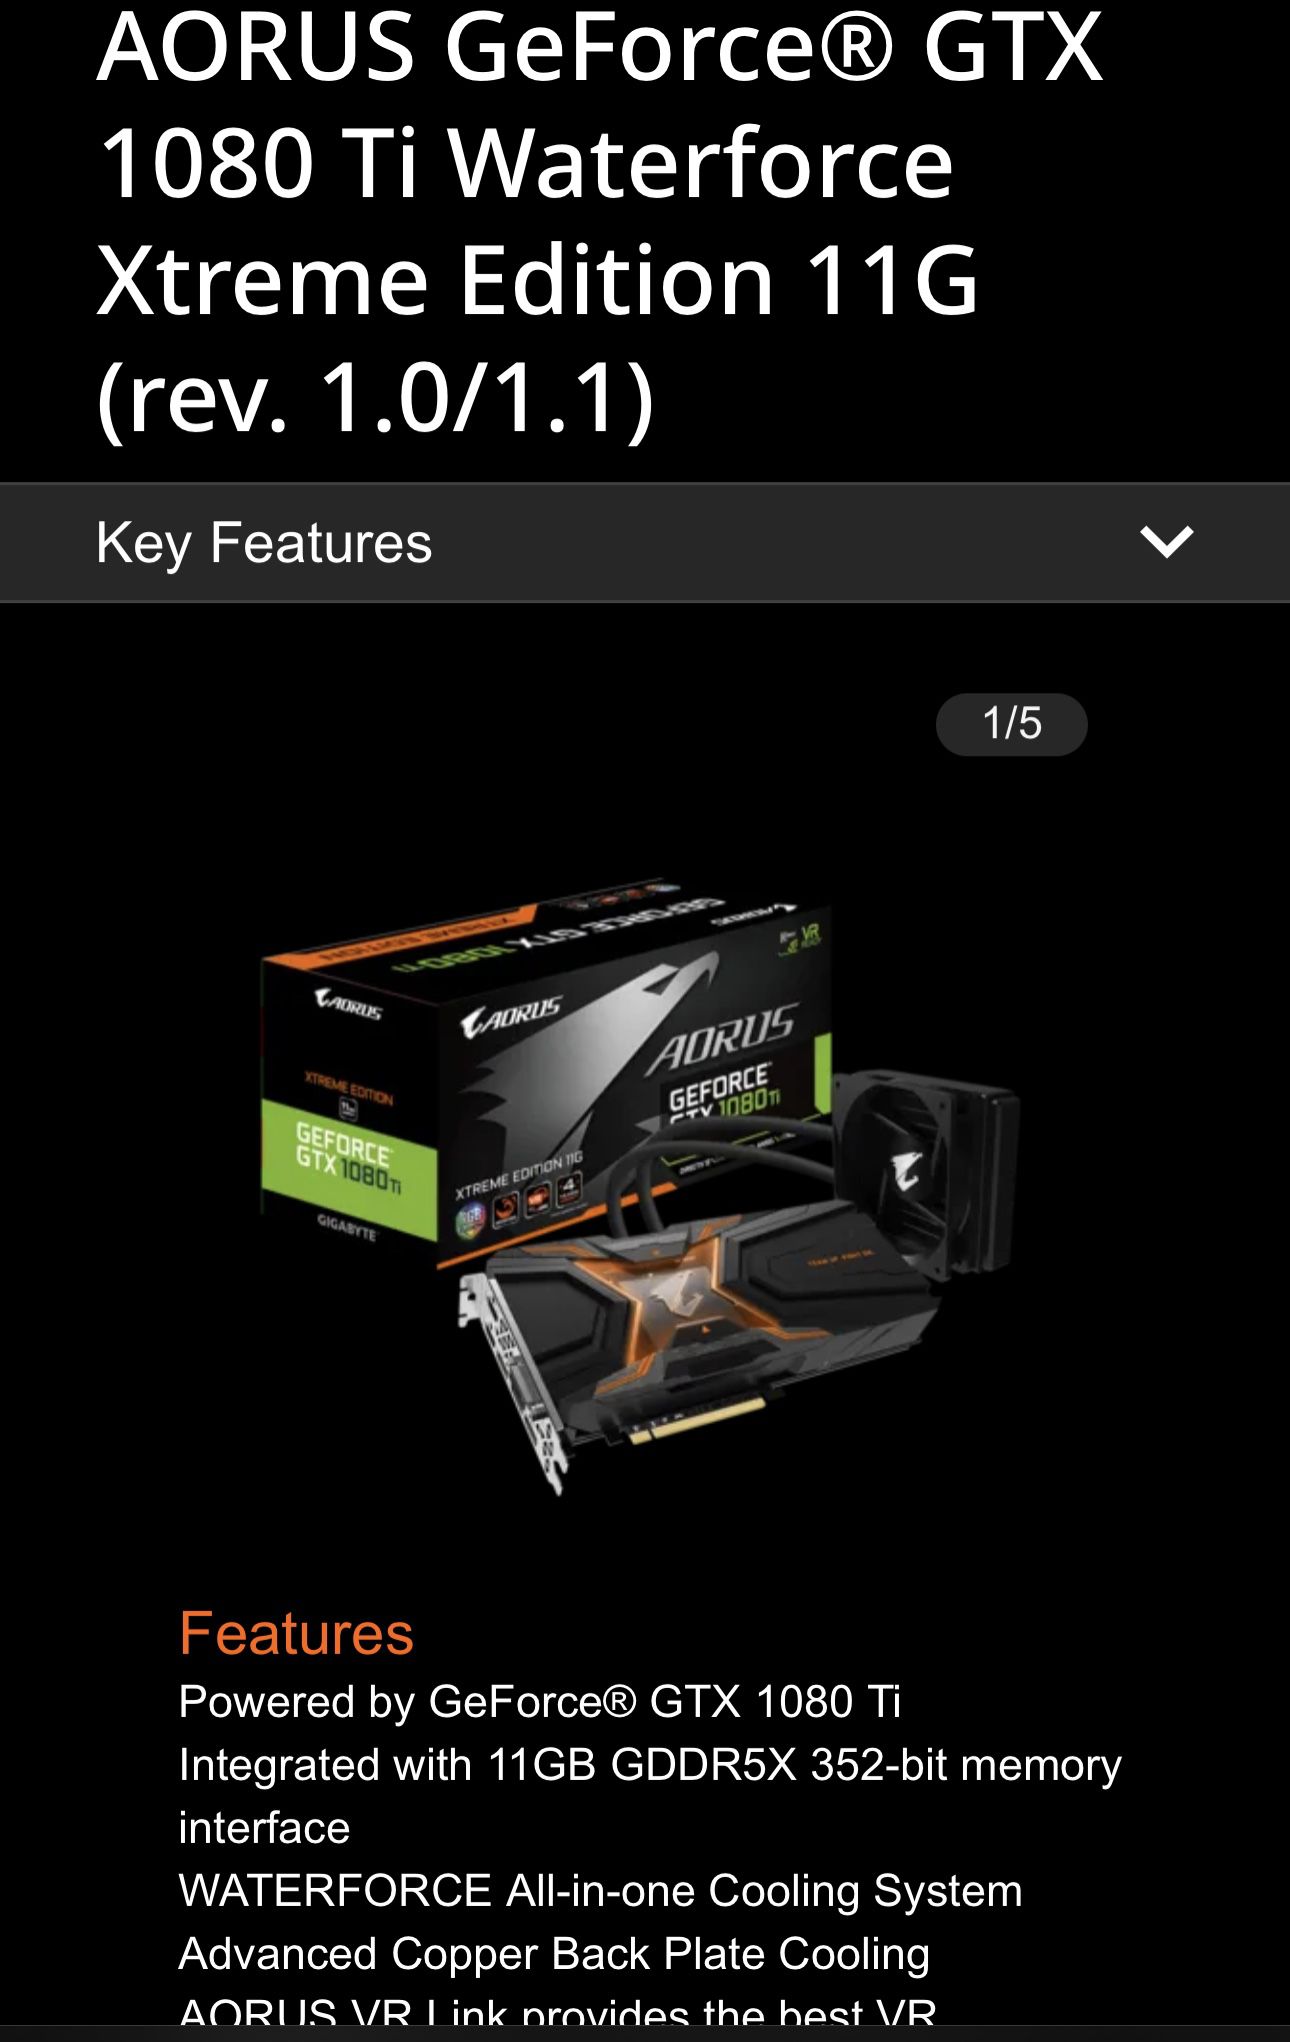 AORUS GeForce® GTX 1080 Ti Waterforce Xtreme Edition 11G (rev. 1.0/1.1) Key  Features